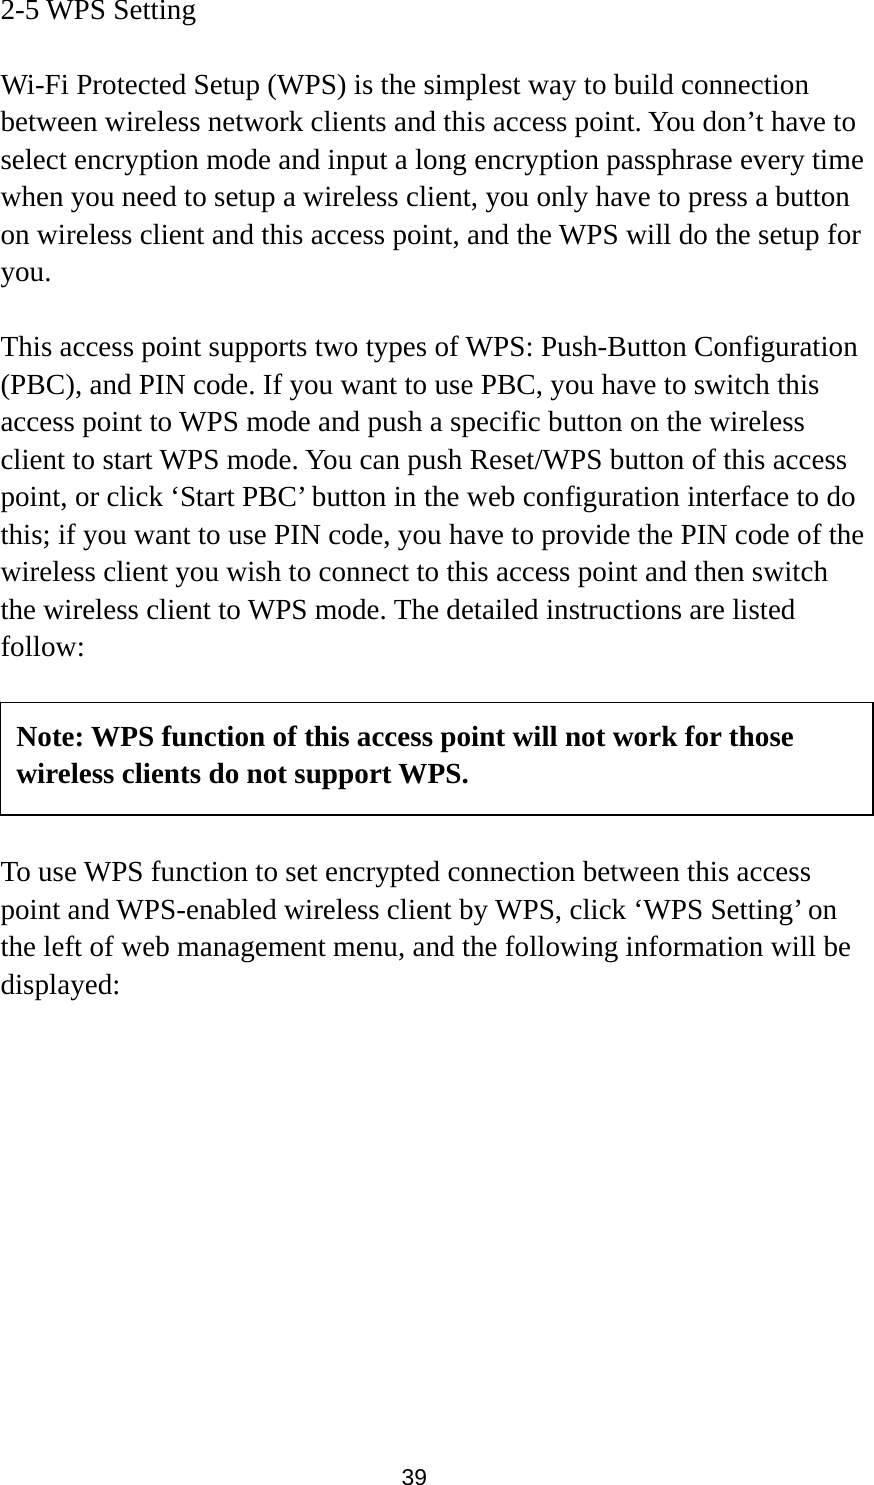  39 2-5 WPS Setting  Wi-Fi Protected Setup (WPS) is the simplest way to build connection between wireless network clients and this access point. You don’t have to select encryption mode and input a long encryption passphrase every time when you need to setup a wireless client, you only have to press a button on wireless client and this access point, and the WPS will do the setup for you.  This access point supports two types of WPS: Push-Button Configuration (PBC), and PIN code. If you want to use PBC, you have to switch this access point to WPS mode and push a specific button on the wireless client to start WPS mode. You can push Reset/WPS button of this access point, or click ‘Start PBC’ button in the web configuration interface to do this; if you want to use PIN code, you have to provide the PIN code of the wireless client you wish to connect to this access point and then switch the wireless client to WPS mode. The detailed instructions are listed follow:      To use WPS function to set encrypted connection between this access point and WPS-enabled wireless client by WPS, click ‘WPS Setting’ on the left of web management menu, and the following information will be displayed:  Note: WPS function of this access point will not work for those wireless clients do not support WPS. 